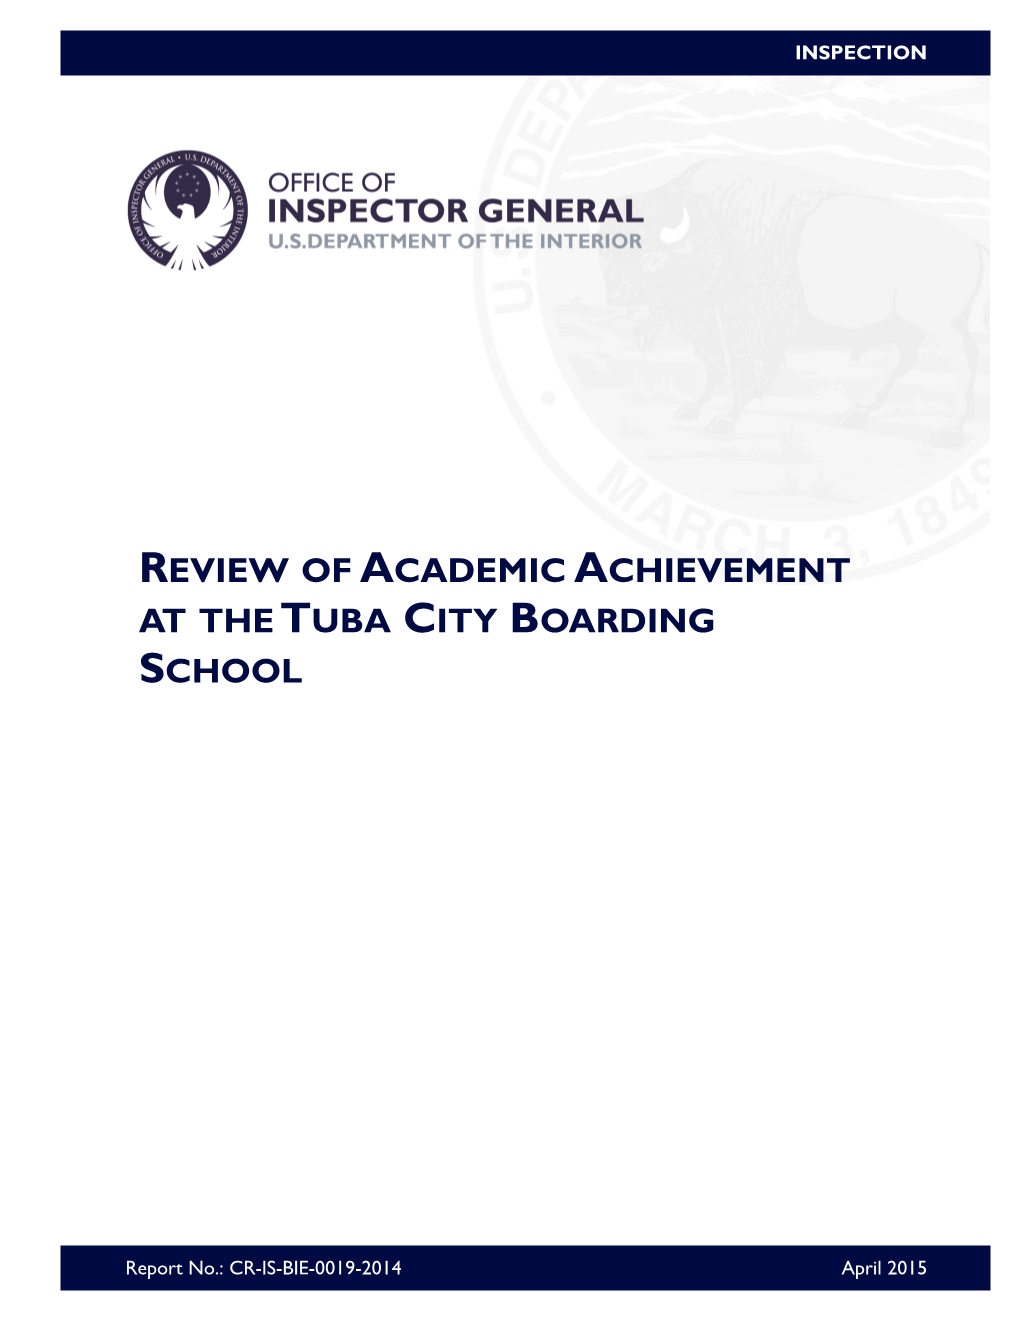 Review of Academic Achievement at the Tuba City Boarding School